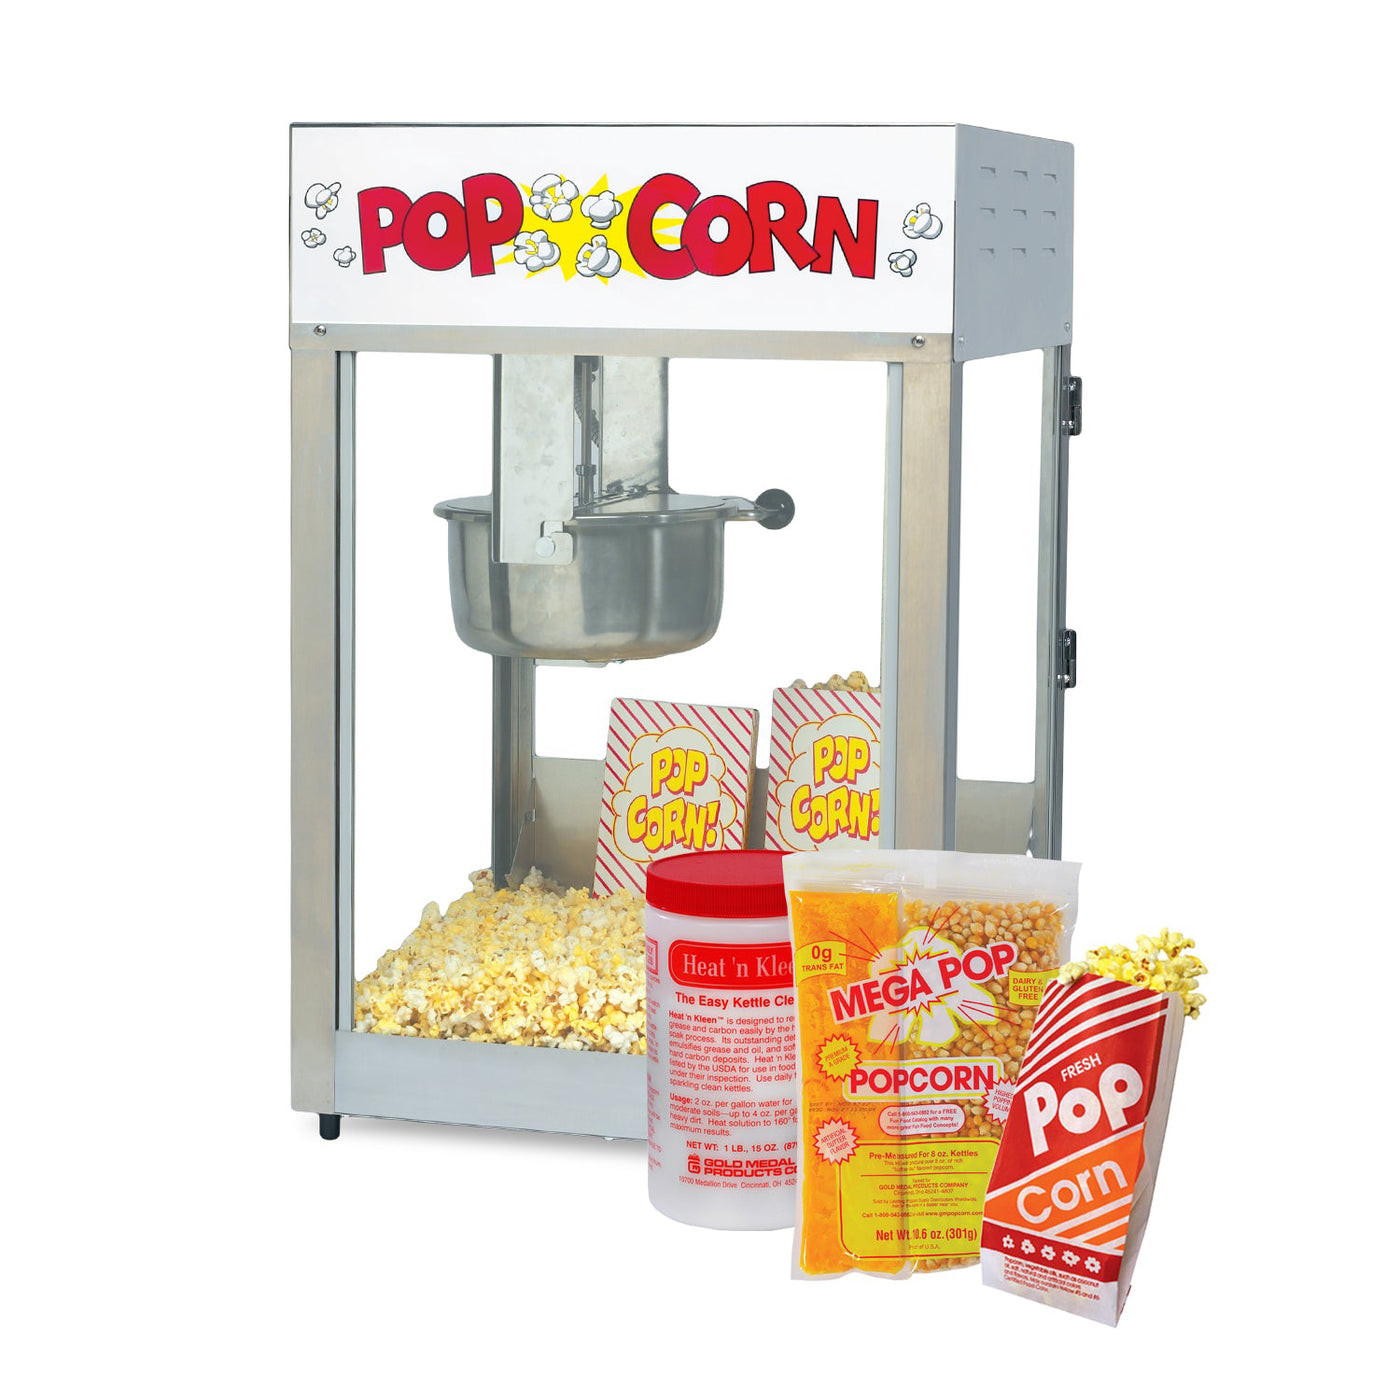 How to use and clean a Popcorn Machine 